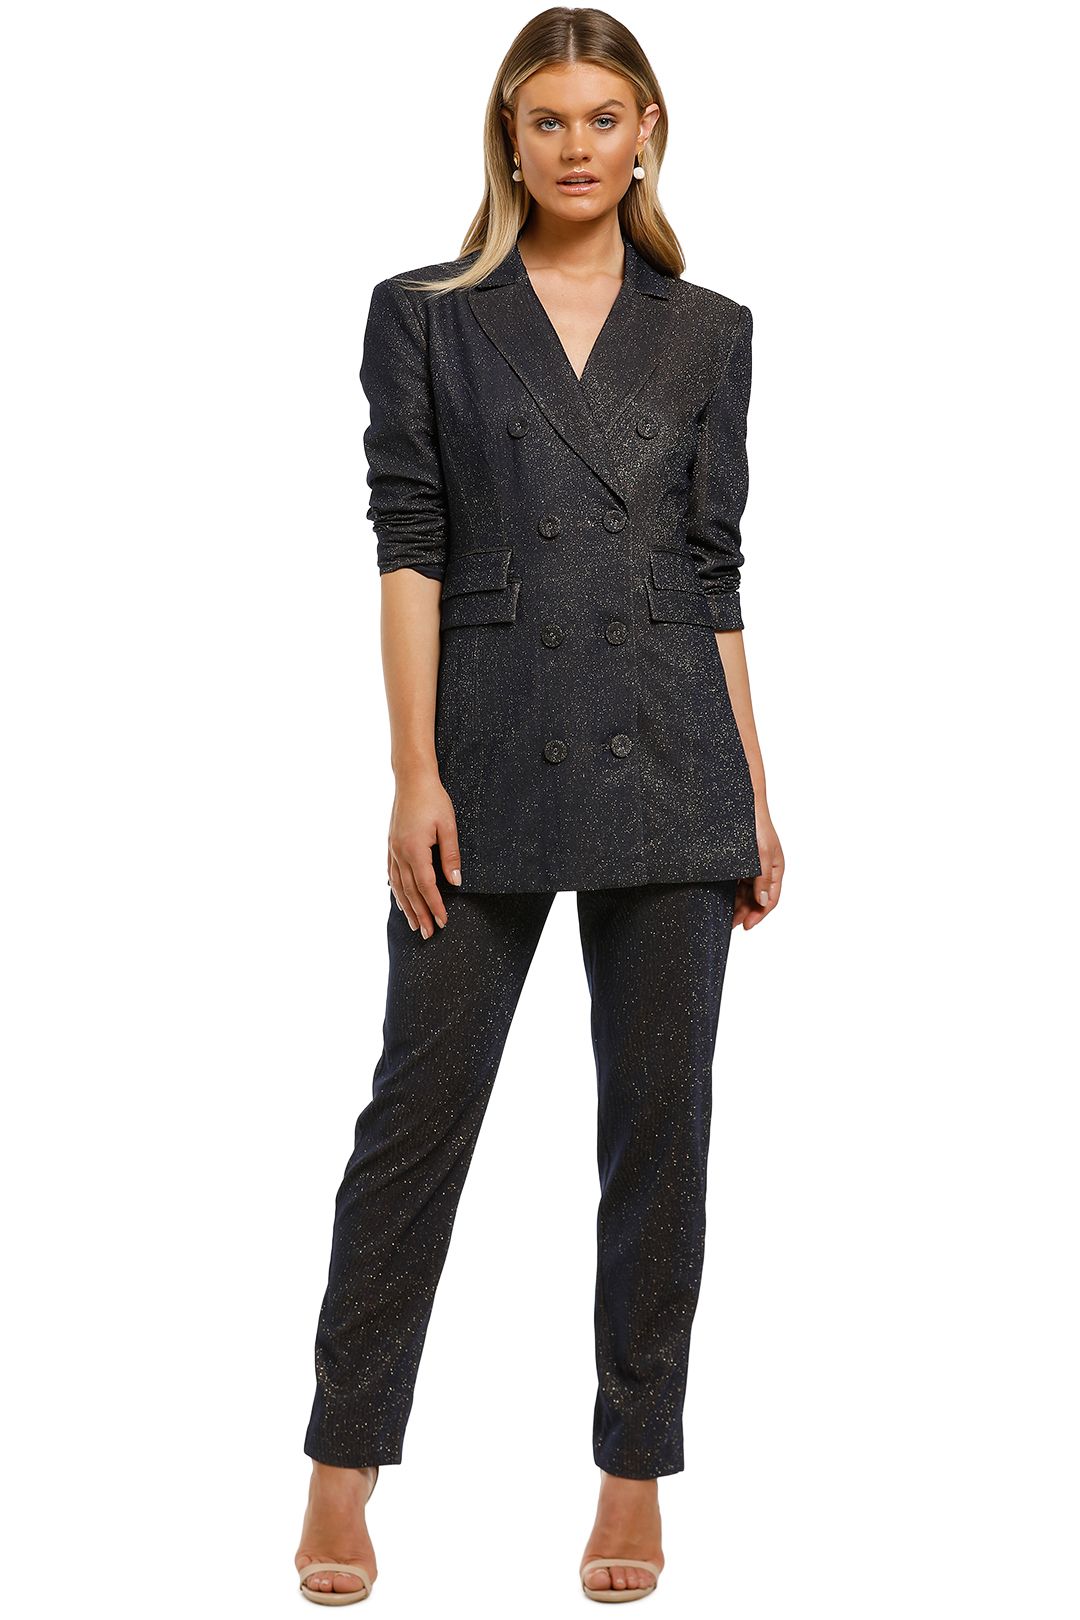 CMEO-Collective-By-Night-Blazer-and-Pant-Set-Navy-Metallic-Front